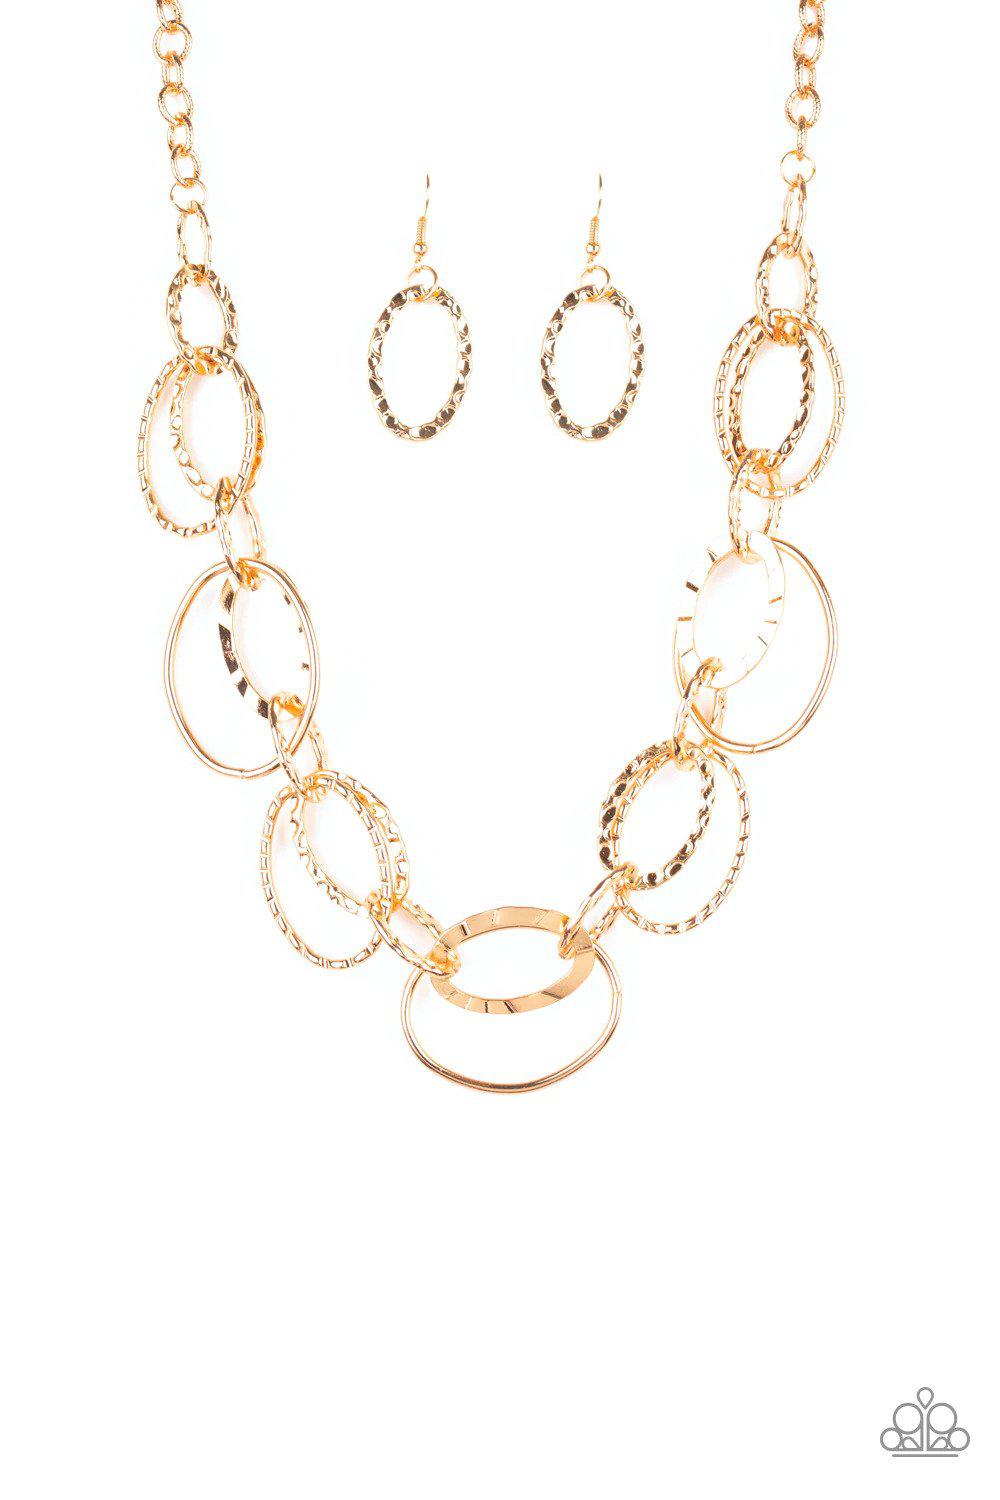 Bend OVAL Backwards Gold Necklace - Paparazzi Accessories- lightbox - CarasShop.com - $5 Jewelry by Cara Jewels